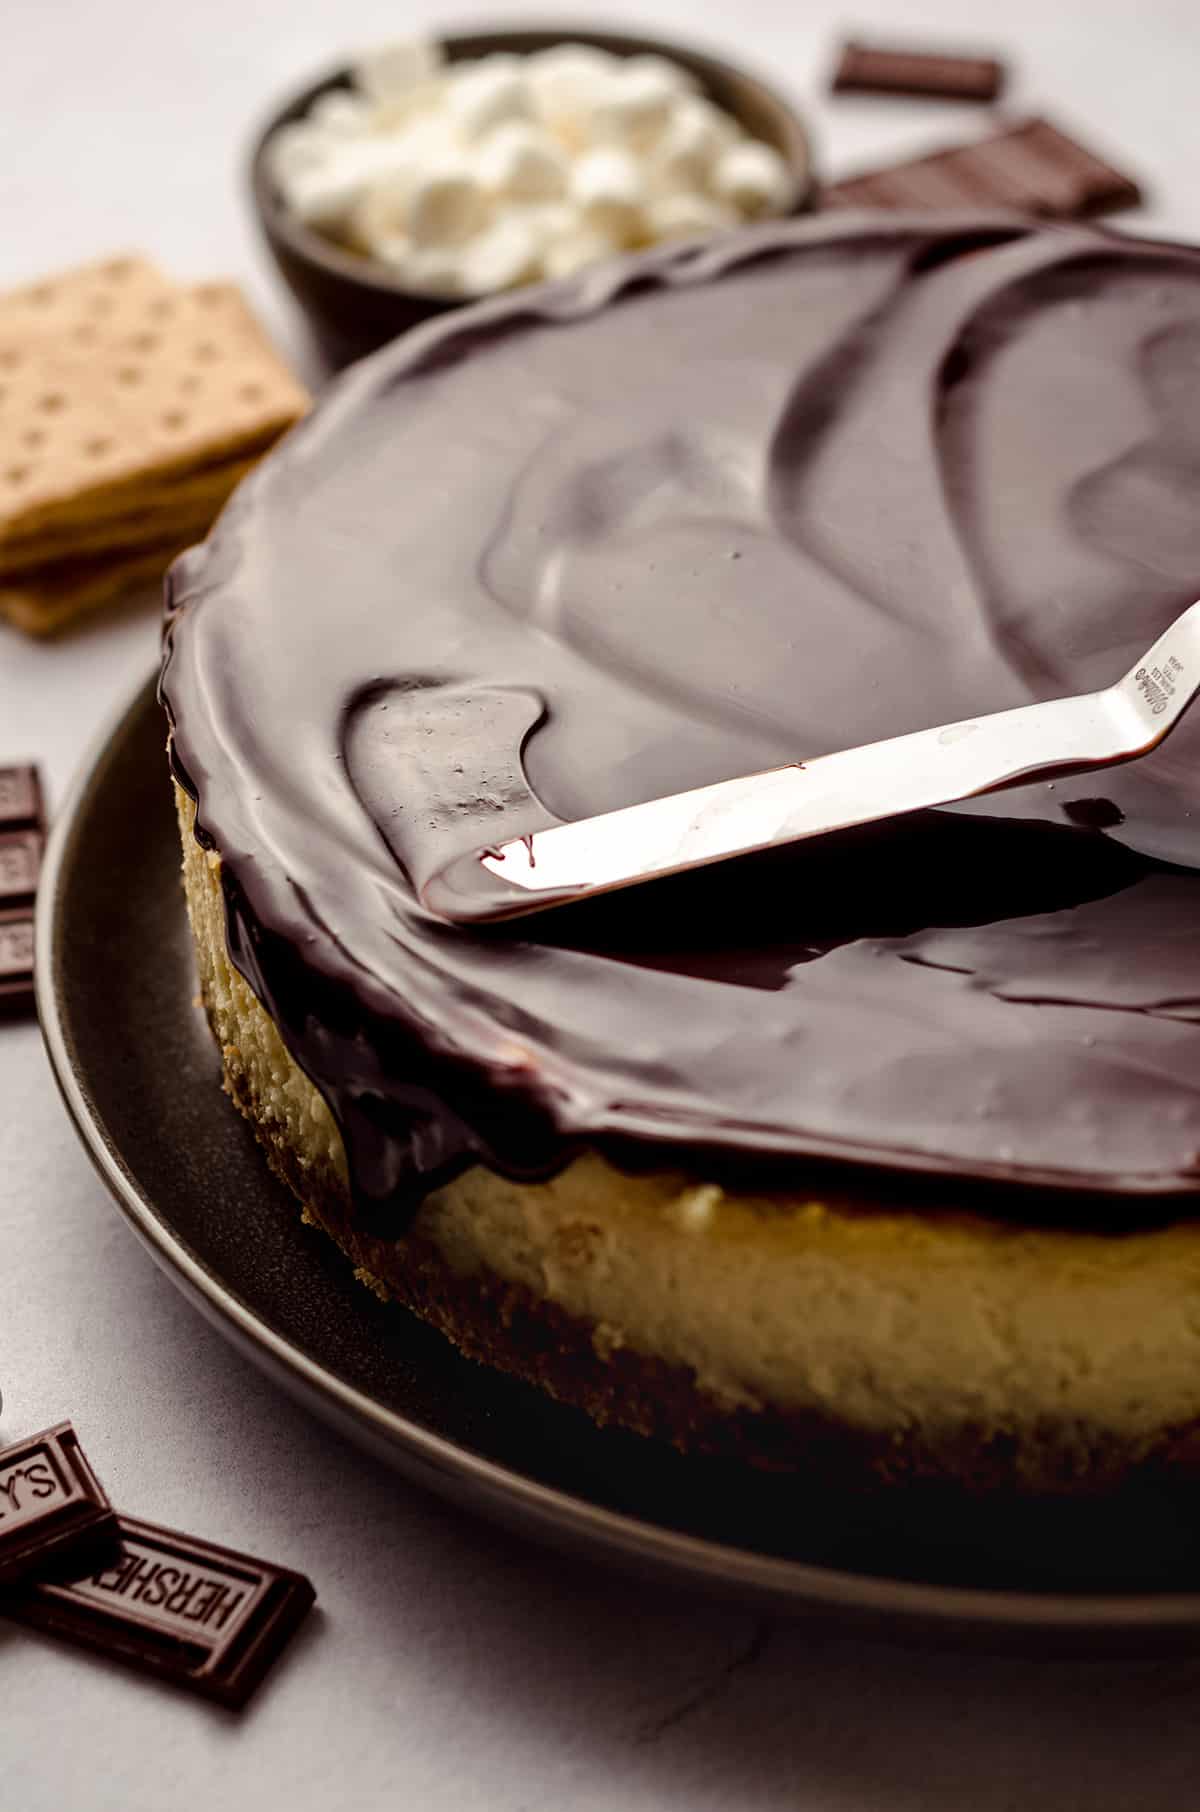 Spreading hot fudge sauce over the surface of a baked cheesecake.